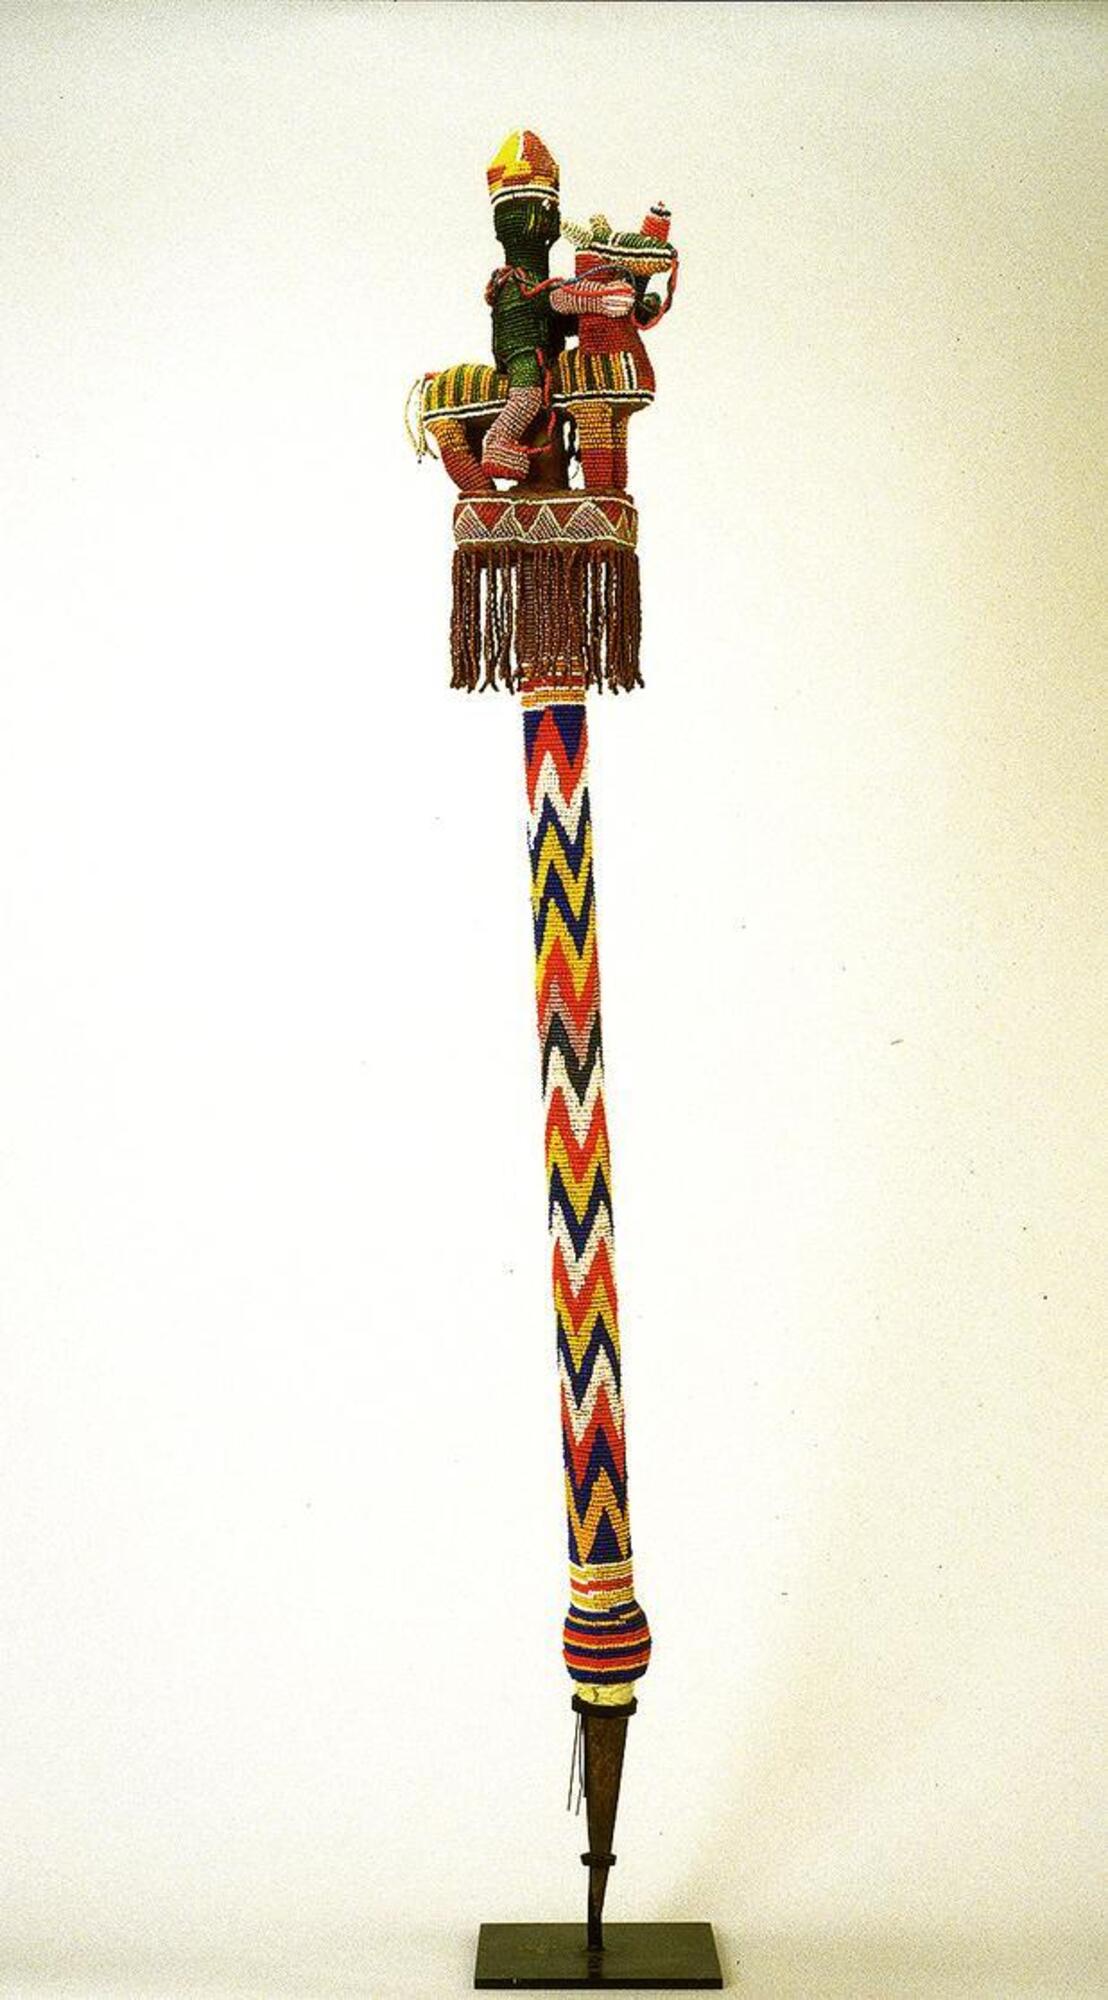 Wooden staff covered with beads, displaying a zig-zag pattern in blue, white, red, yellow, and pink along the shaft, with a metal point at the base. The finial (top of the staff) consists of an equestrian figure, mostly in green, wearing an elaborate red-and-yellow crown, holding a blue staff and riding a multicolored horse, which stands on a rectangular platform adorned with a fringe of beads.